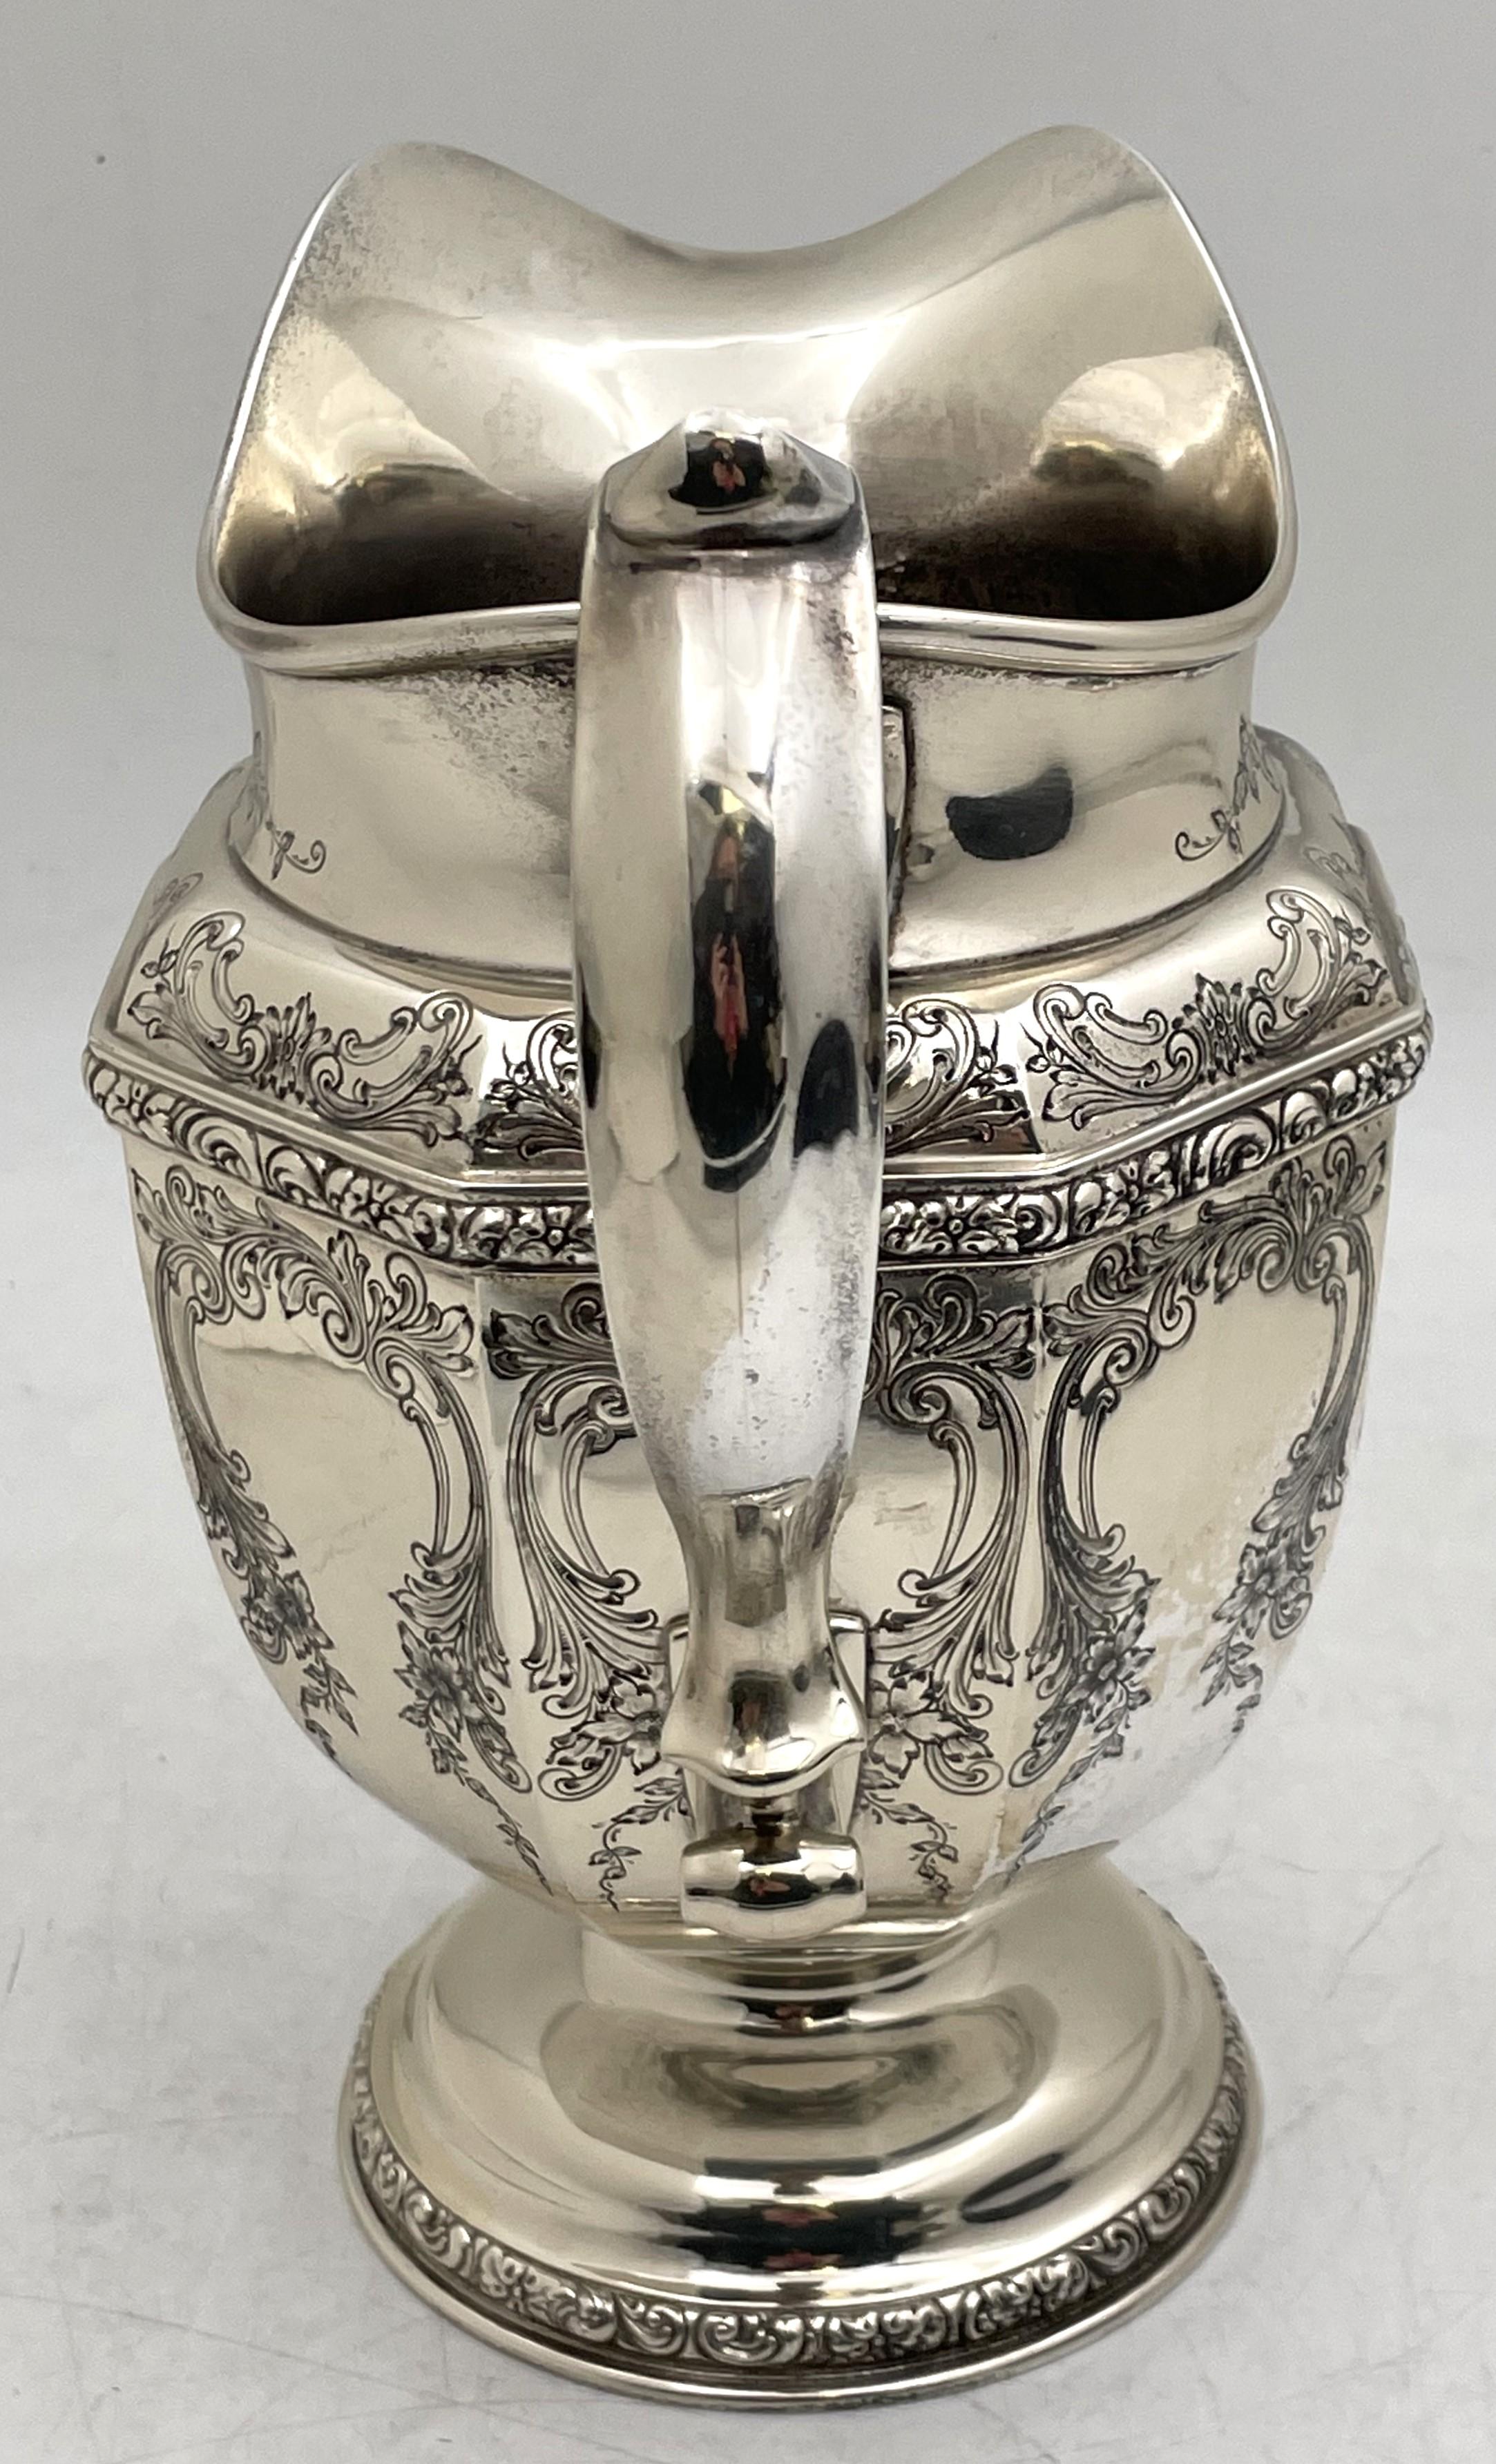 American Durgin Sterling Silver Pitcher Jug in Art Nouveau Style from Early 20th Century For Sale